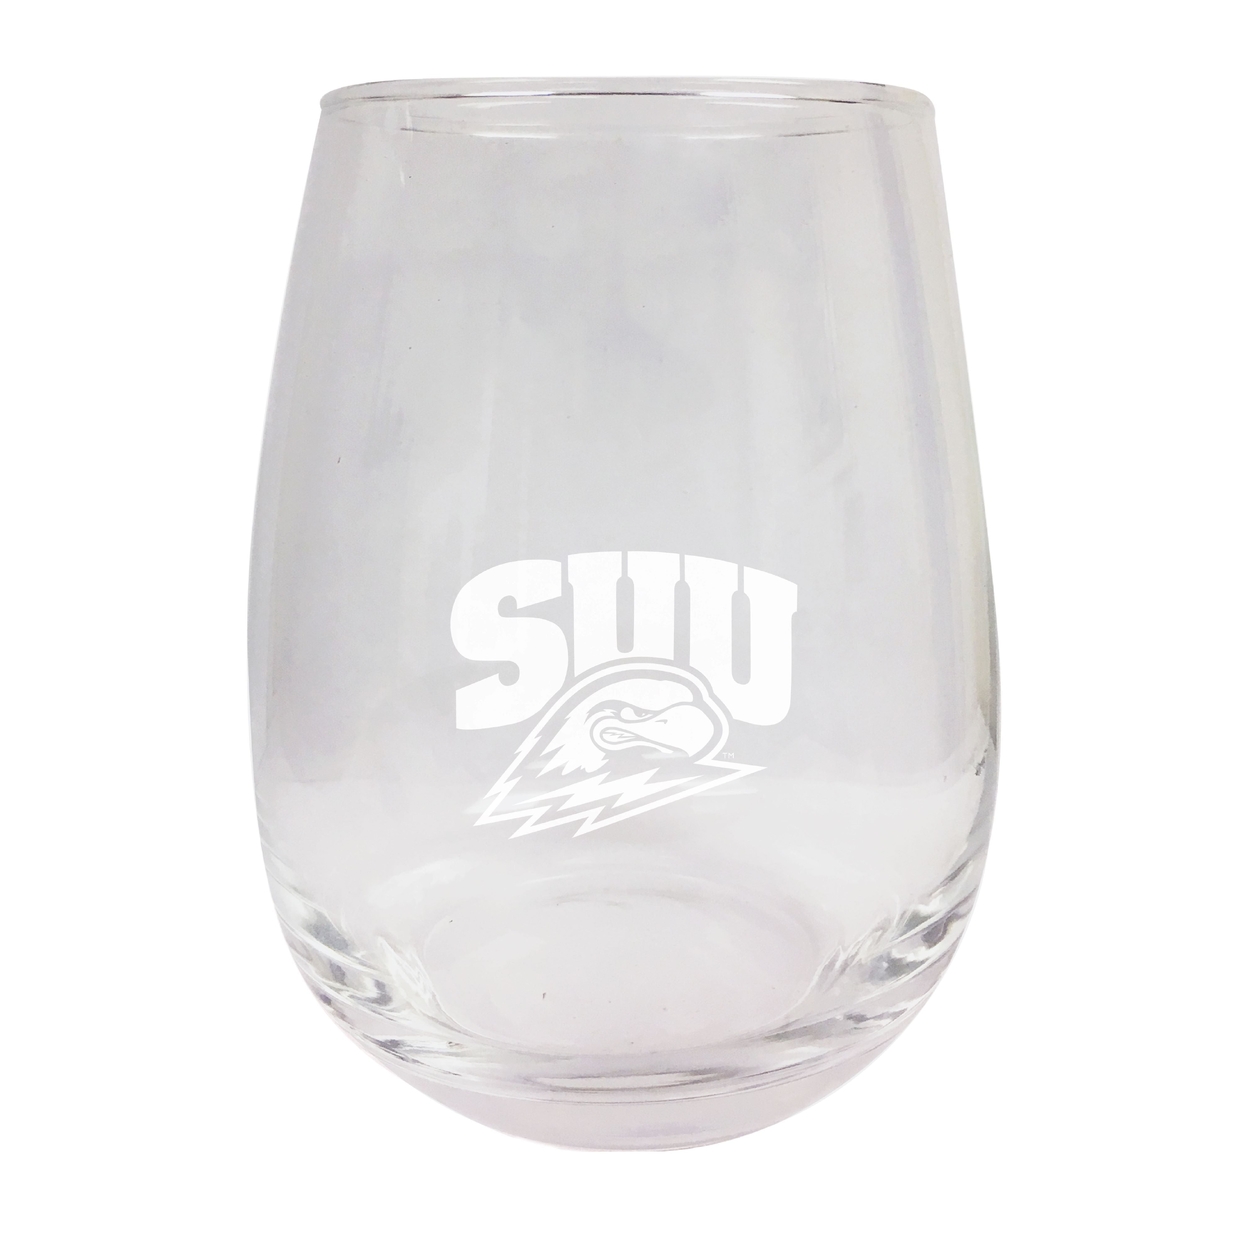 Southern Utah University Etched Stemless Wine Glass